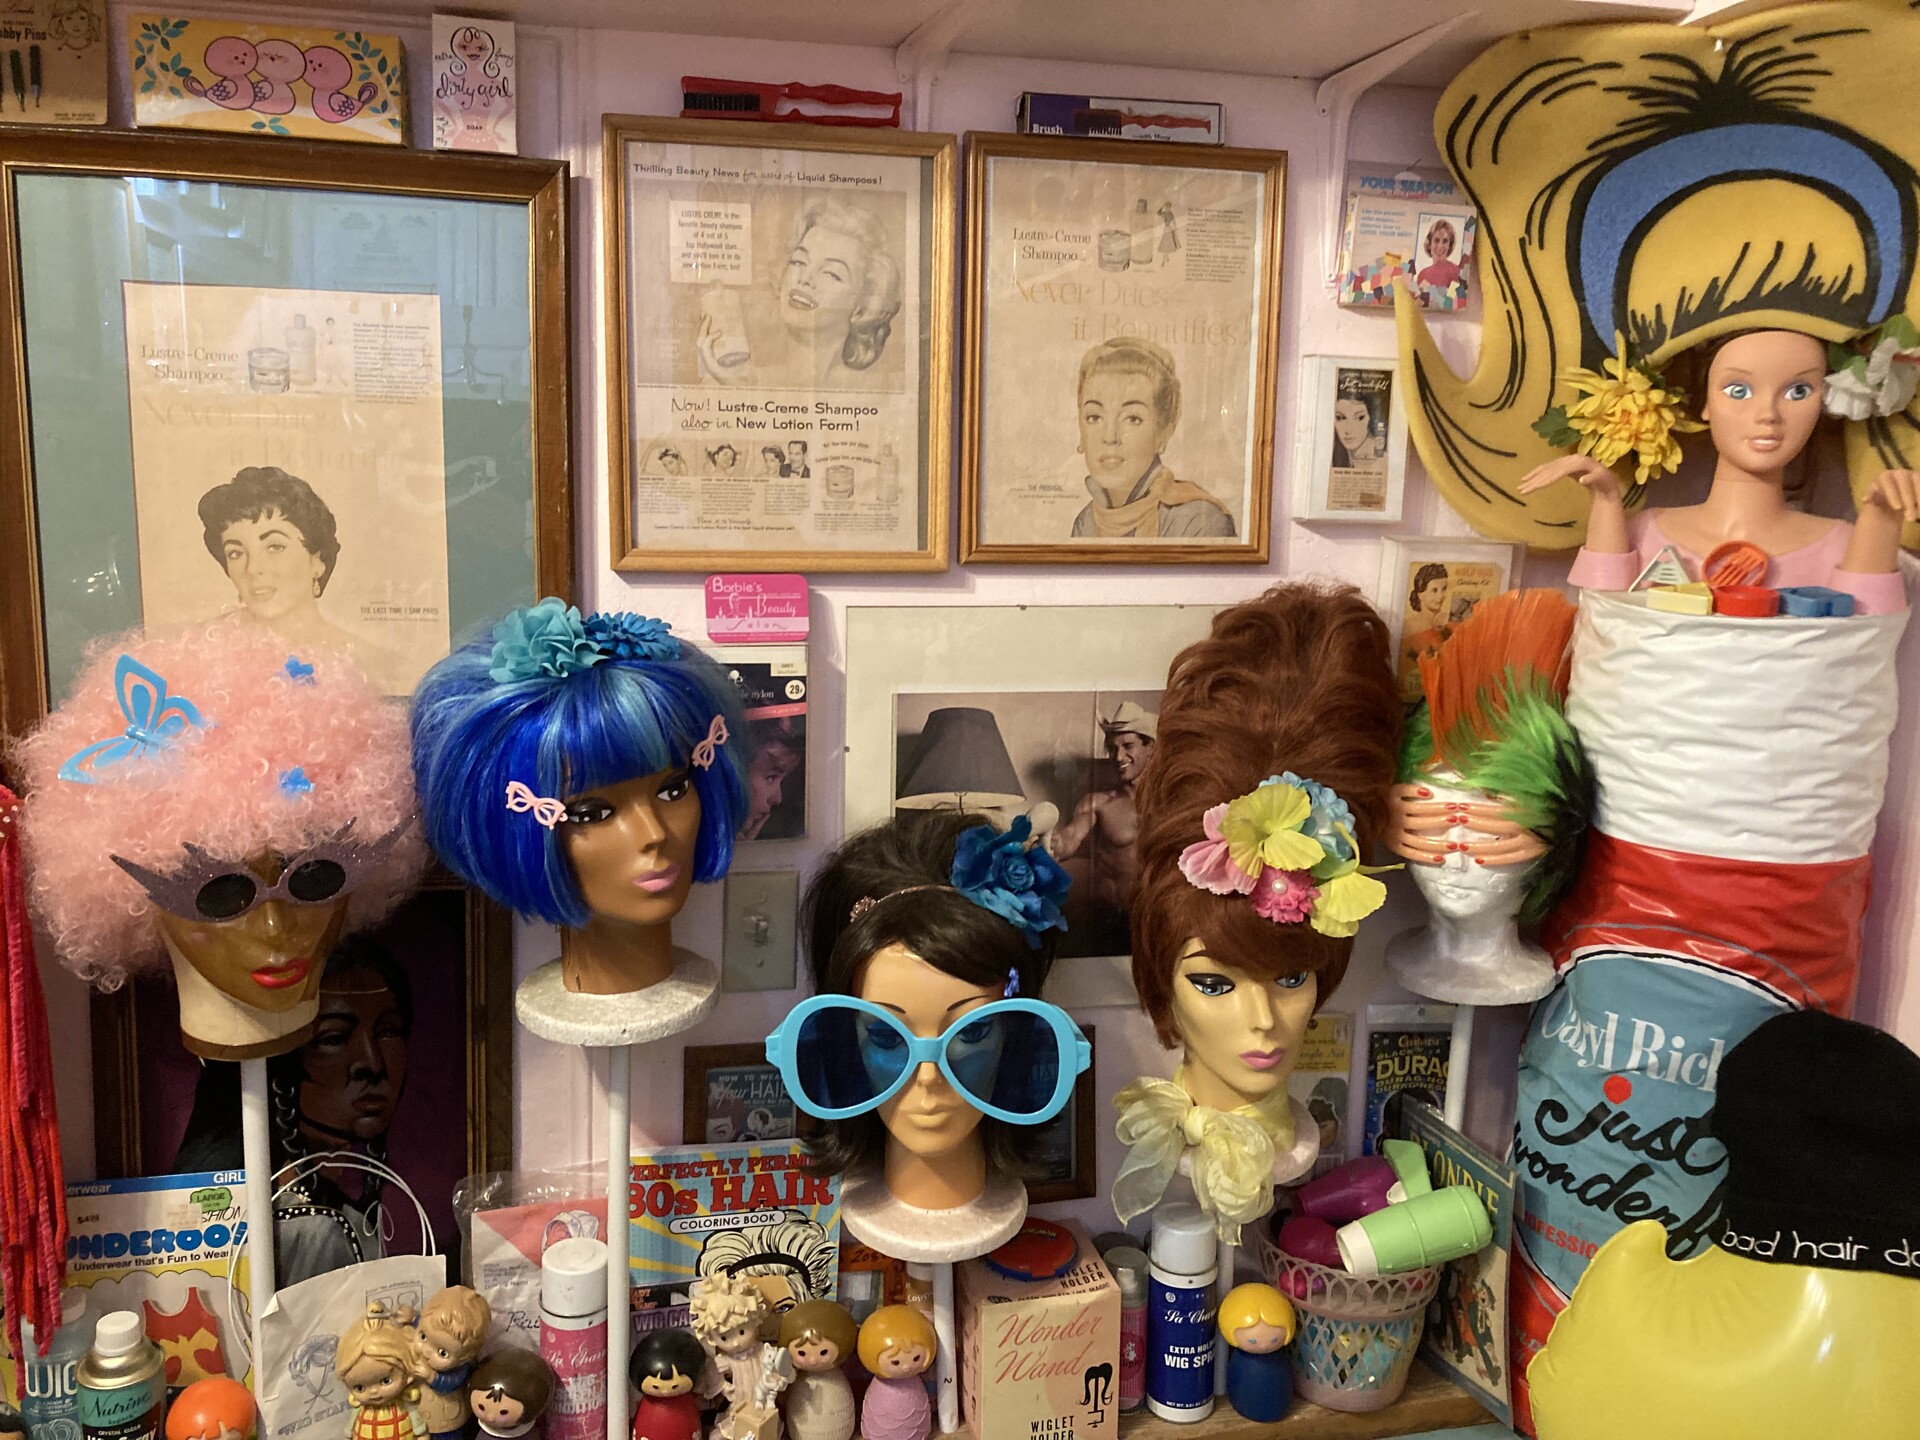 Multi-colored wigs adorn mannequin heads with vintage posters in the background. 